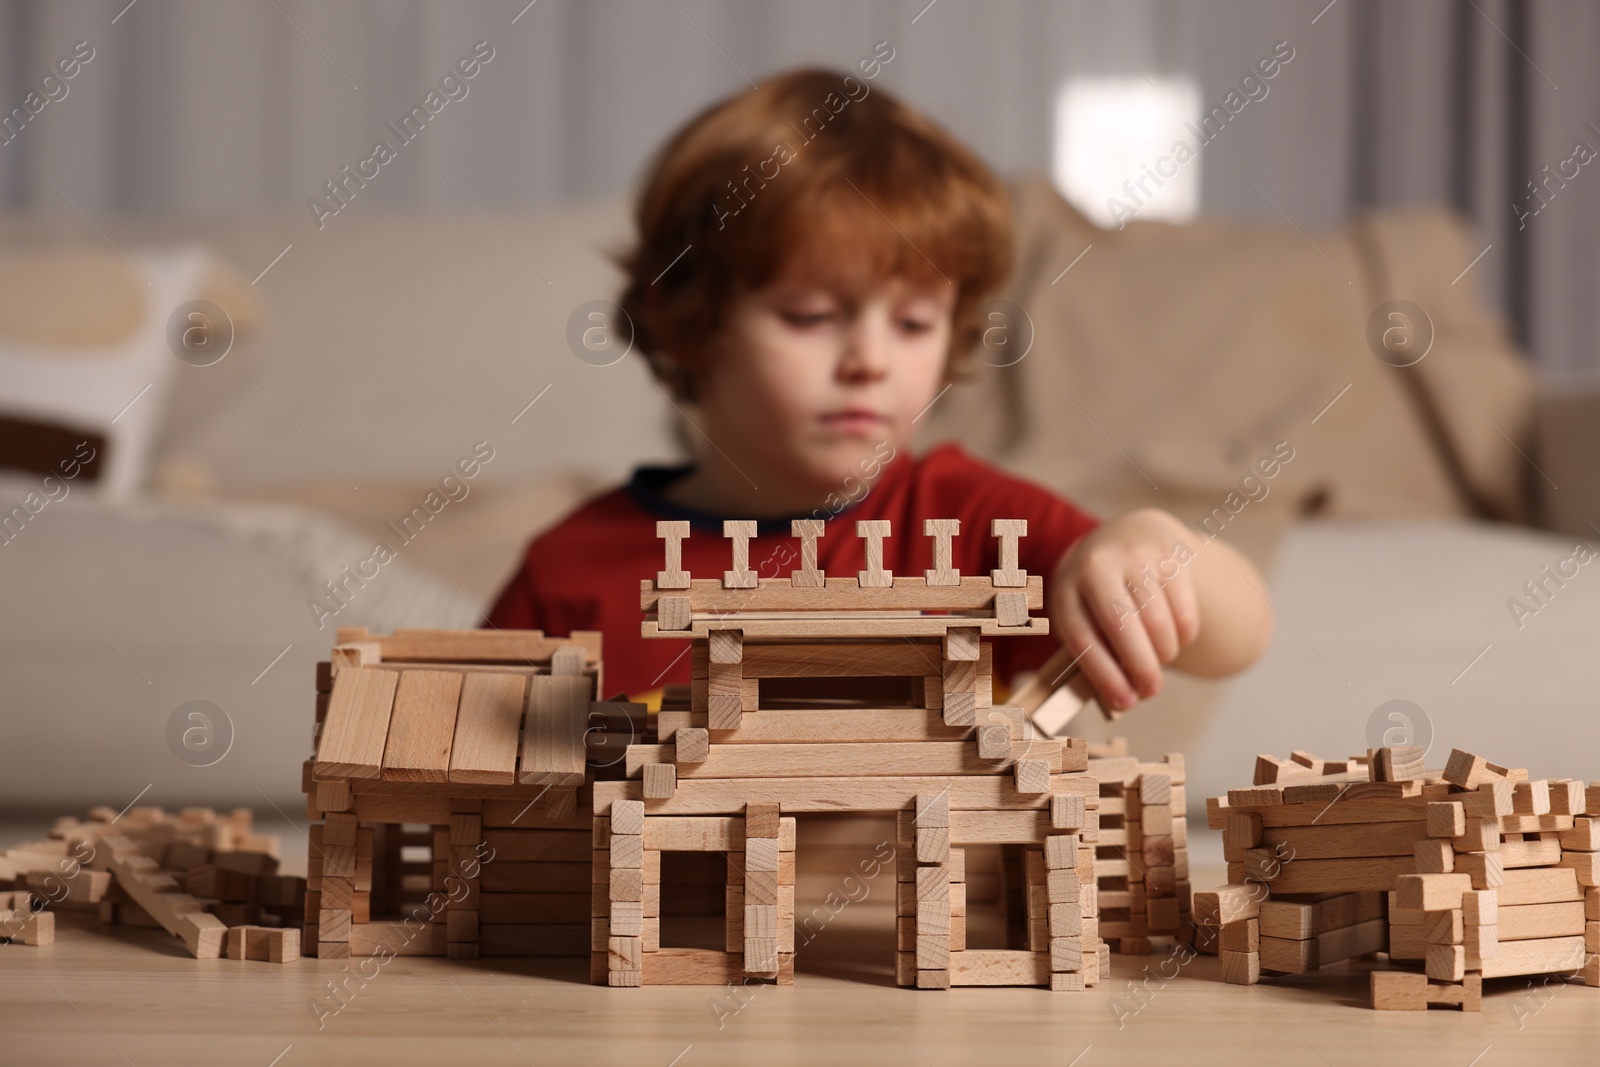 Photo of Cute little boy playing with wooden construction set at table in room, selective focus. Child's toy